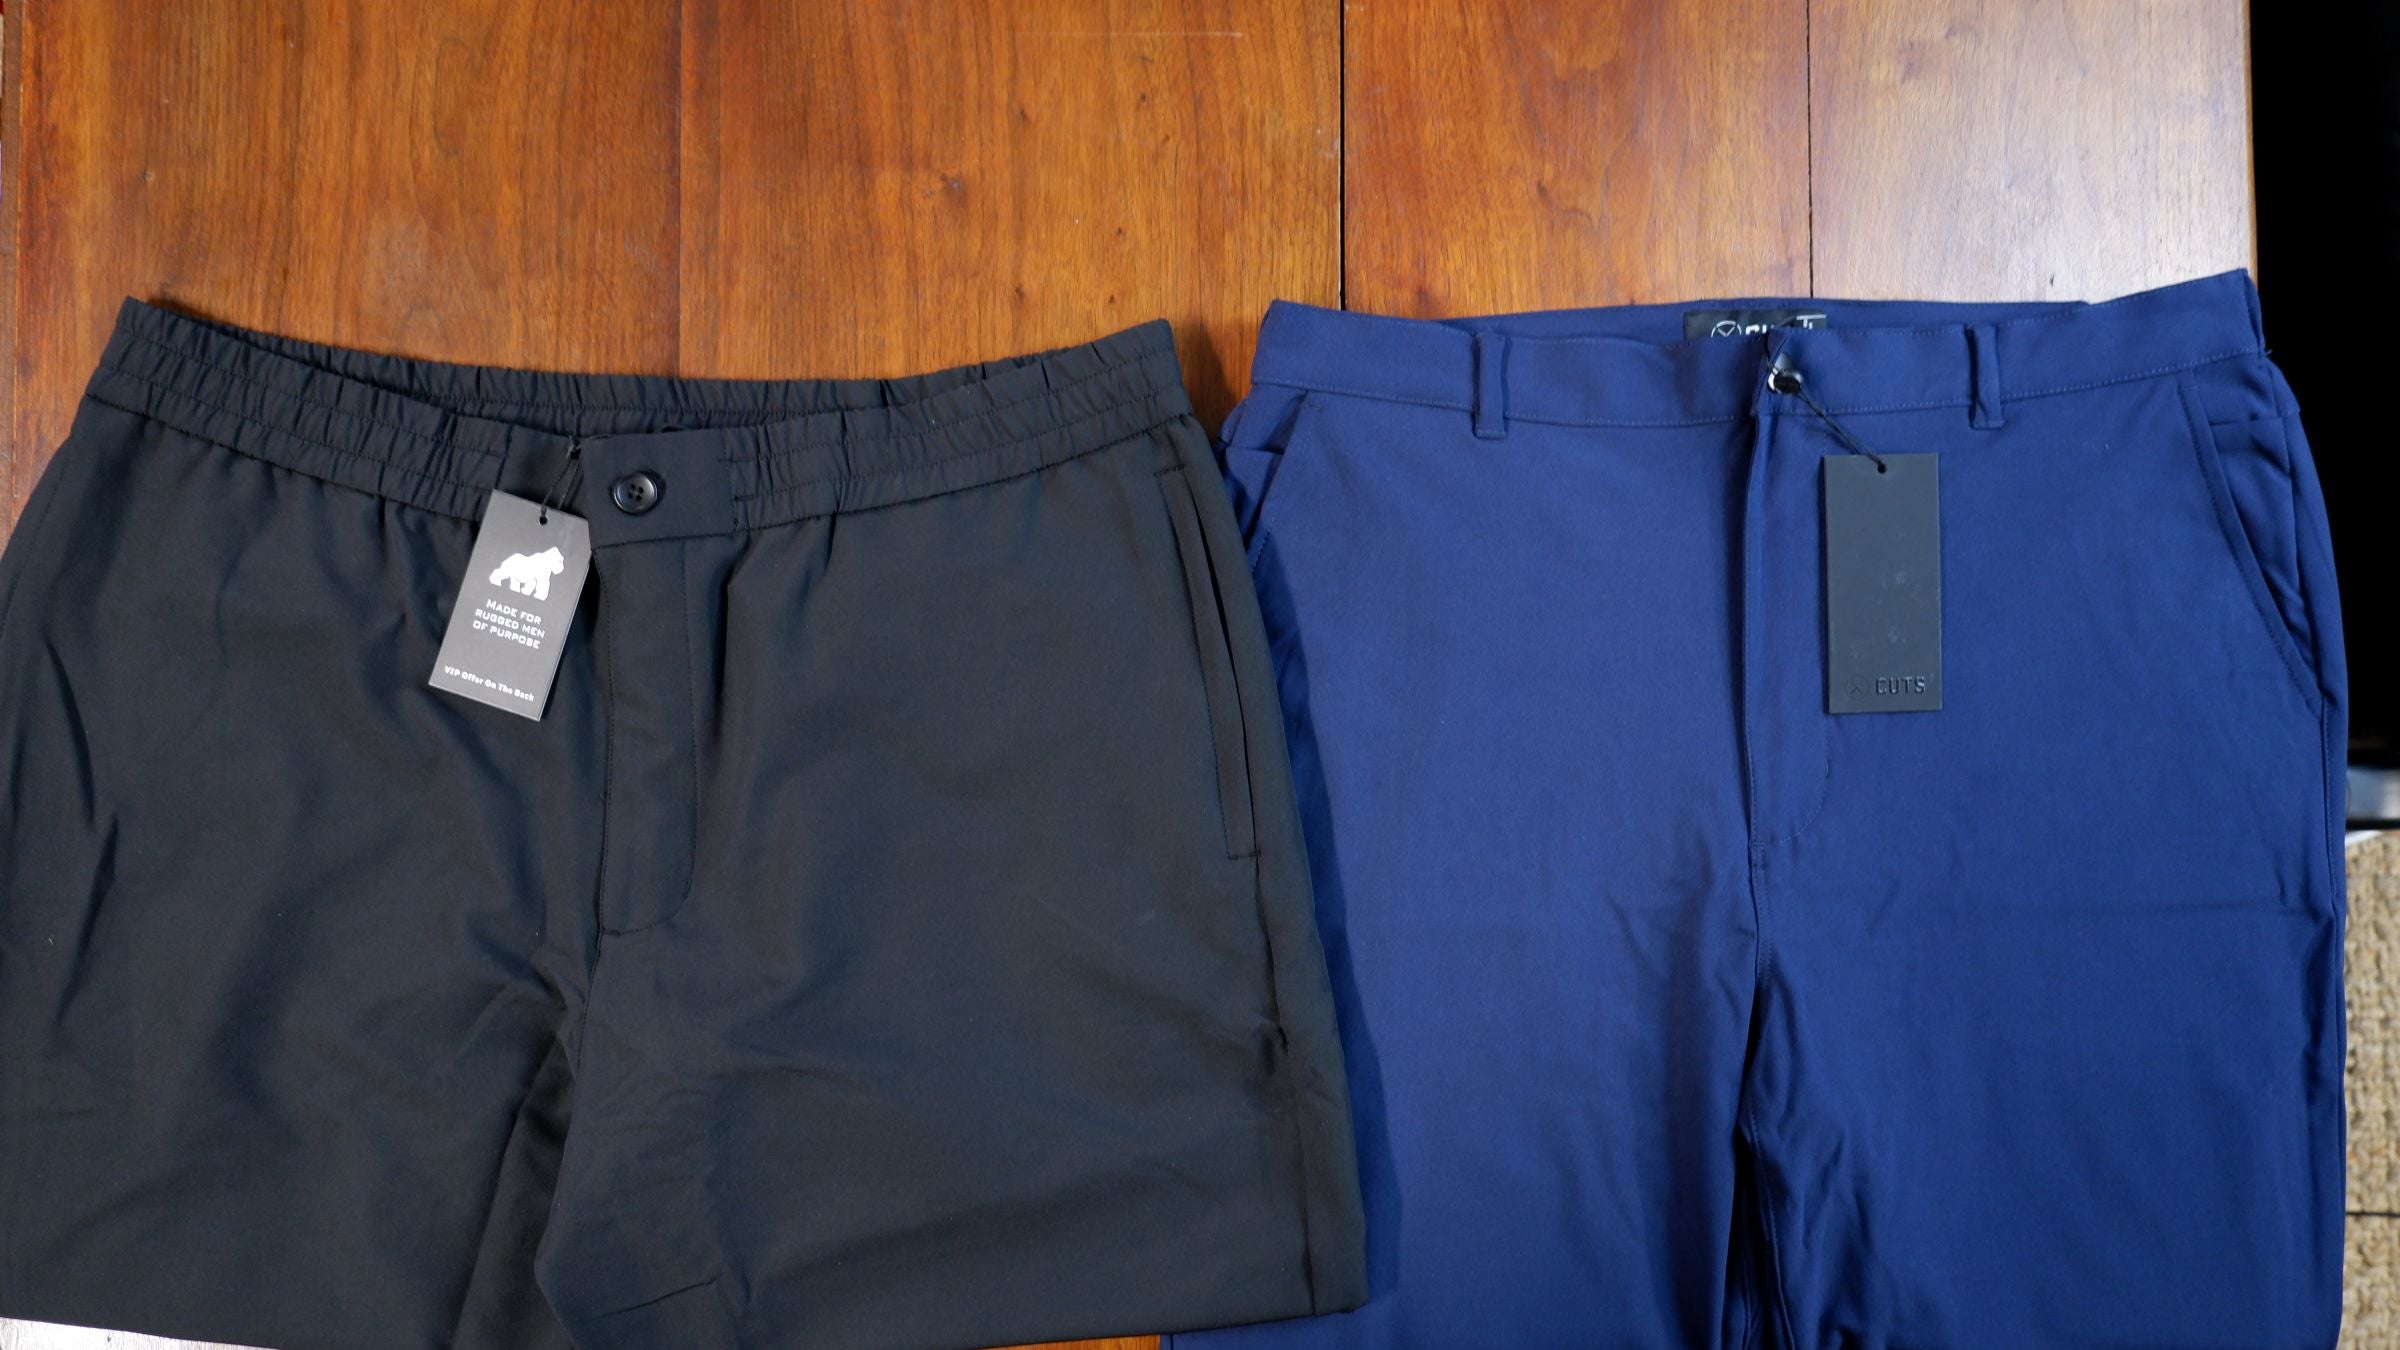 Finally, A Better Alternative to Cuts AO Joggers, An In-Depth Review